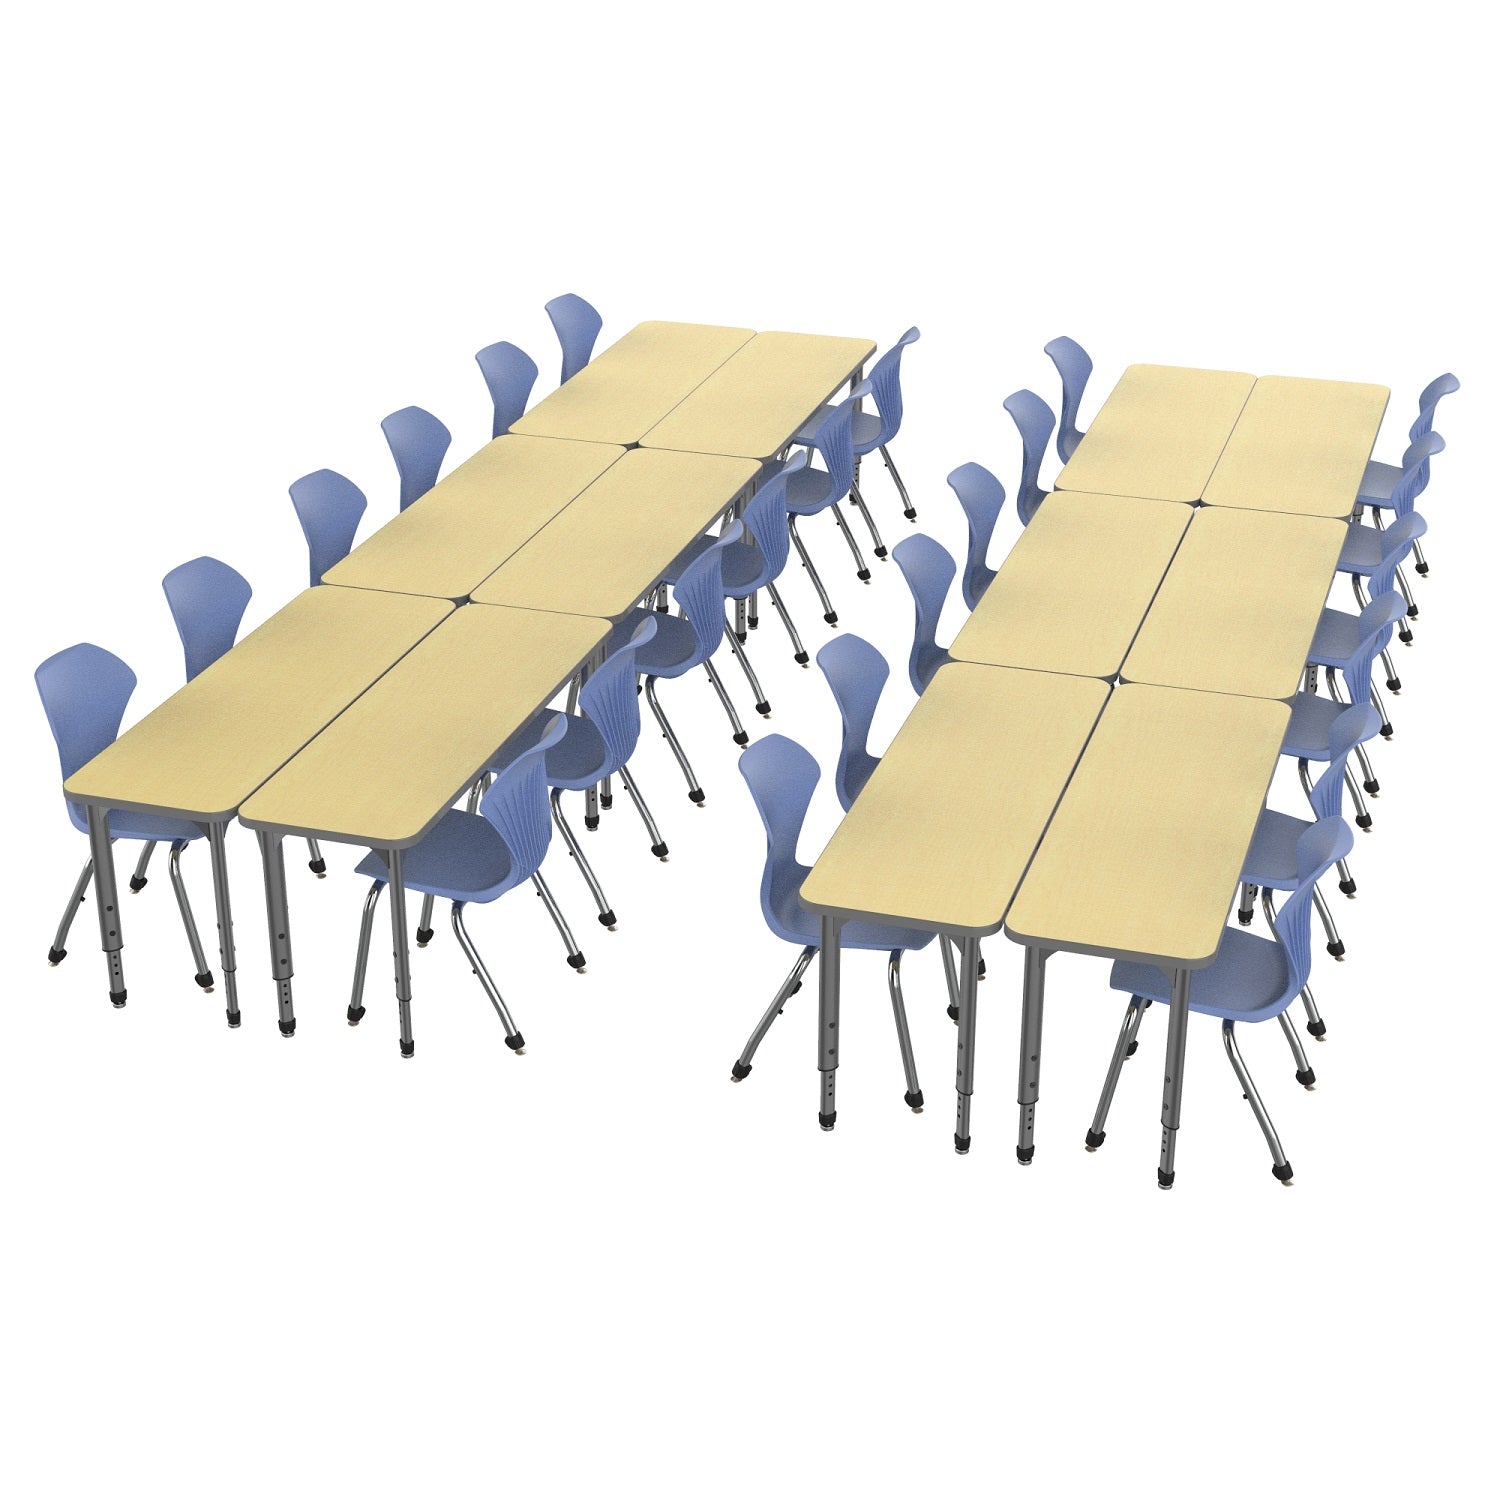 Apex Classroom Desk and Chair Package, 12 Rectangle 2-Student Collaborative Desks, 20" x 60", with 24 Apex Stack Chairs